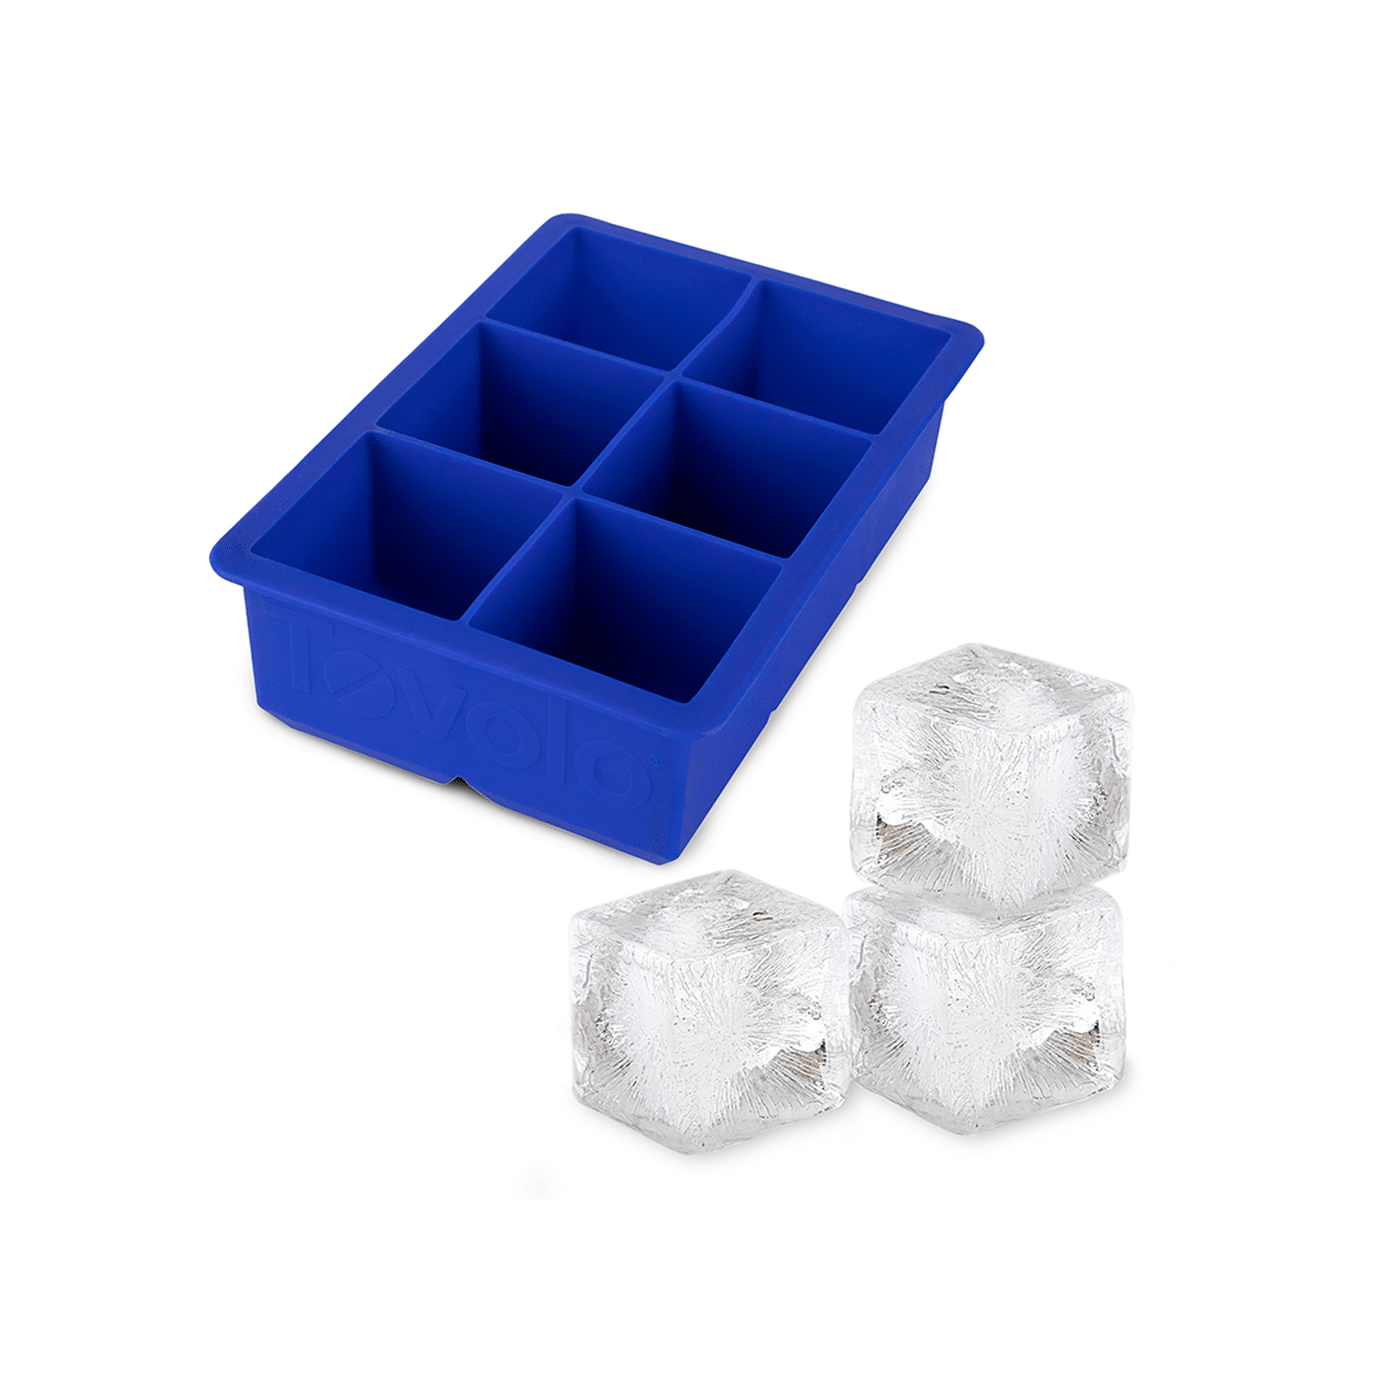 Tovolo King Cube Ice Mold Tray Fade-Resistant Long Lasting Sturdy Silicone Stratus Blue 2 Inch Cubes 